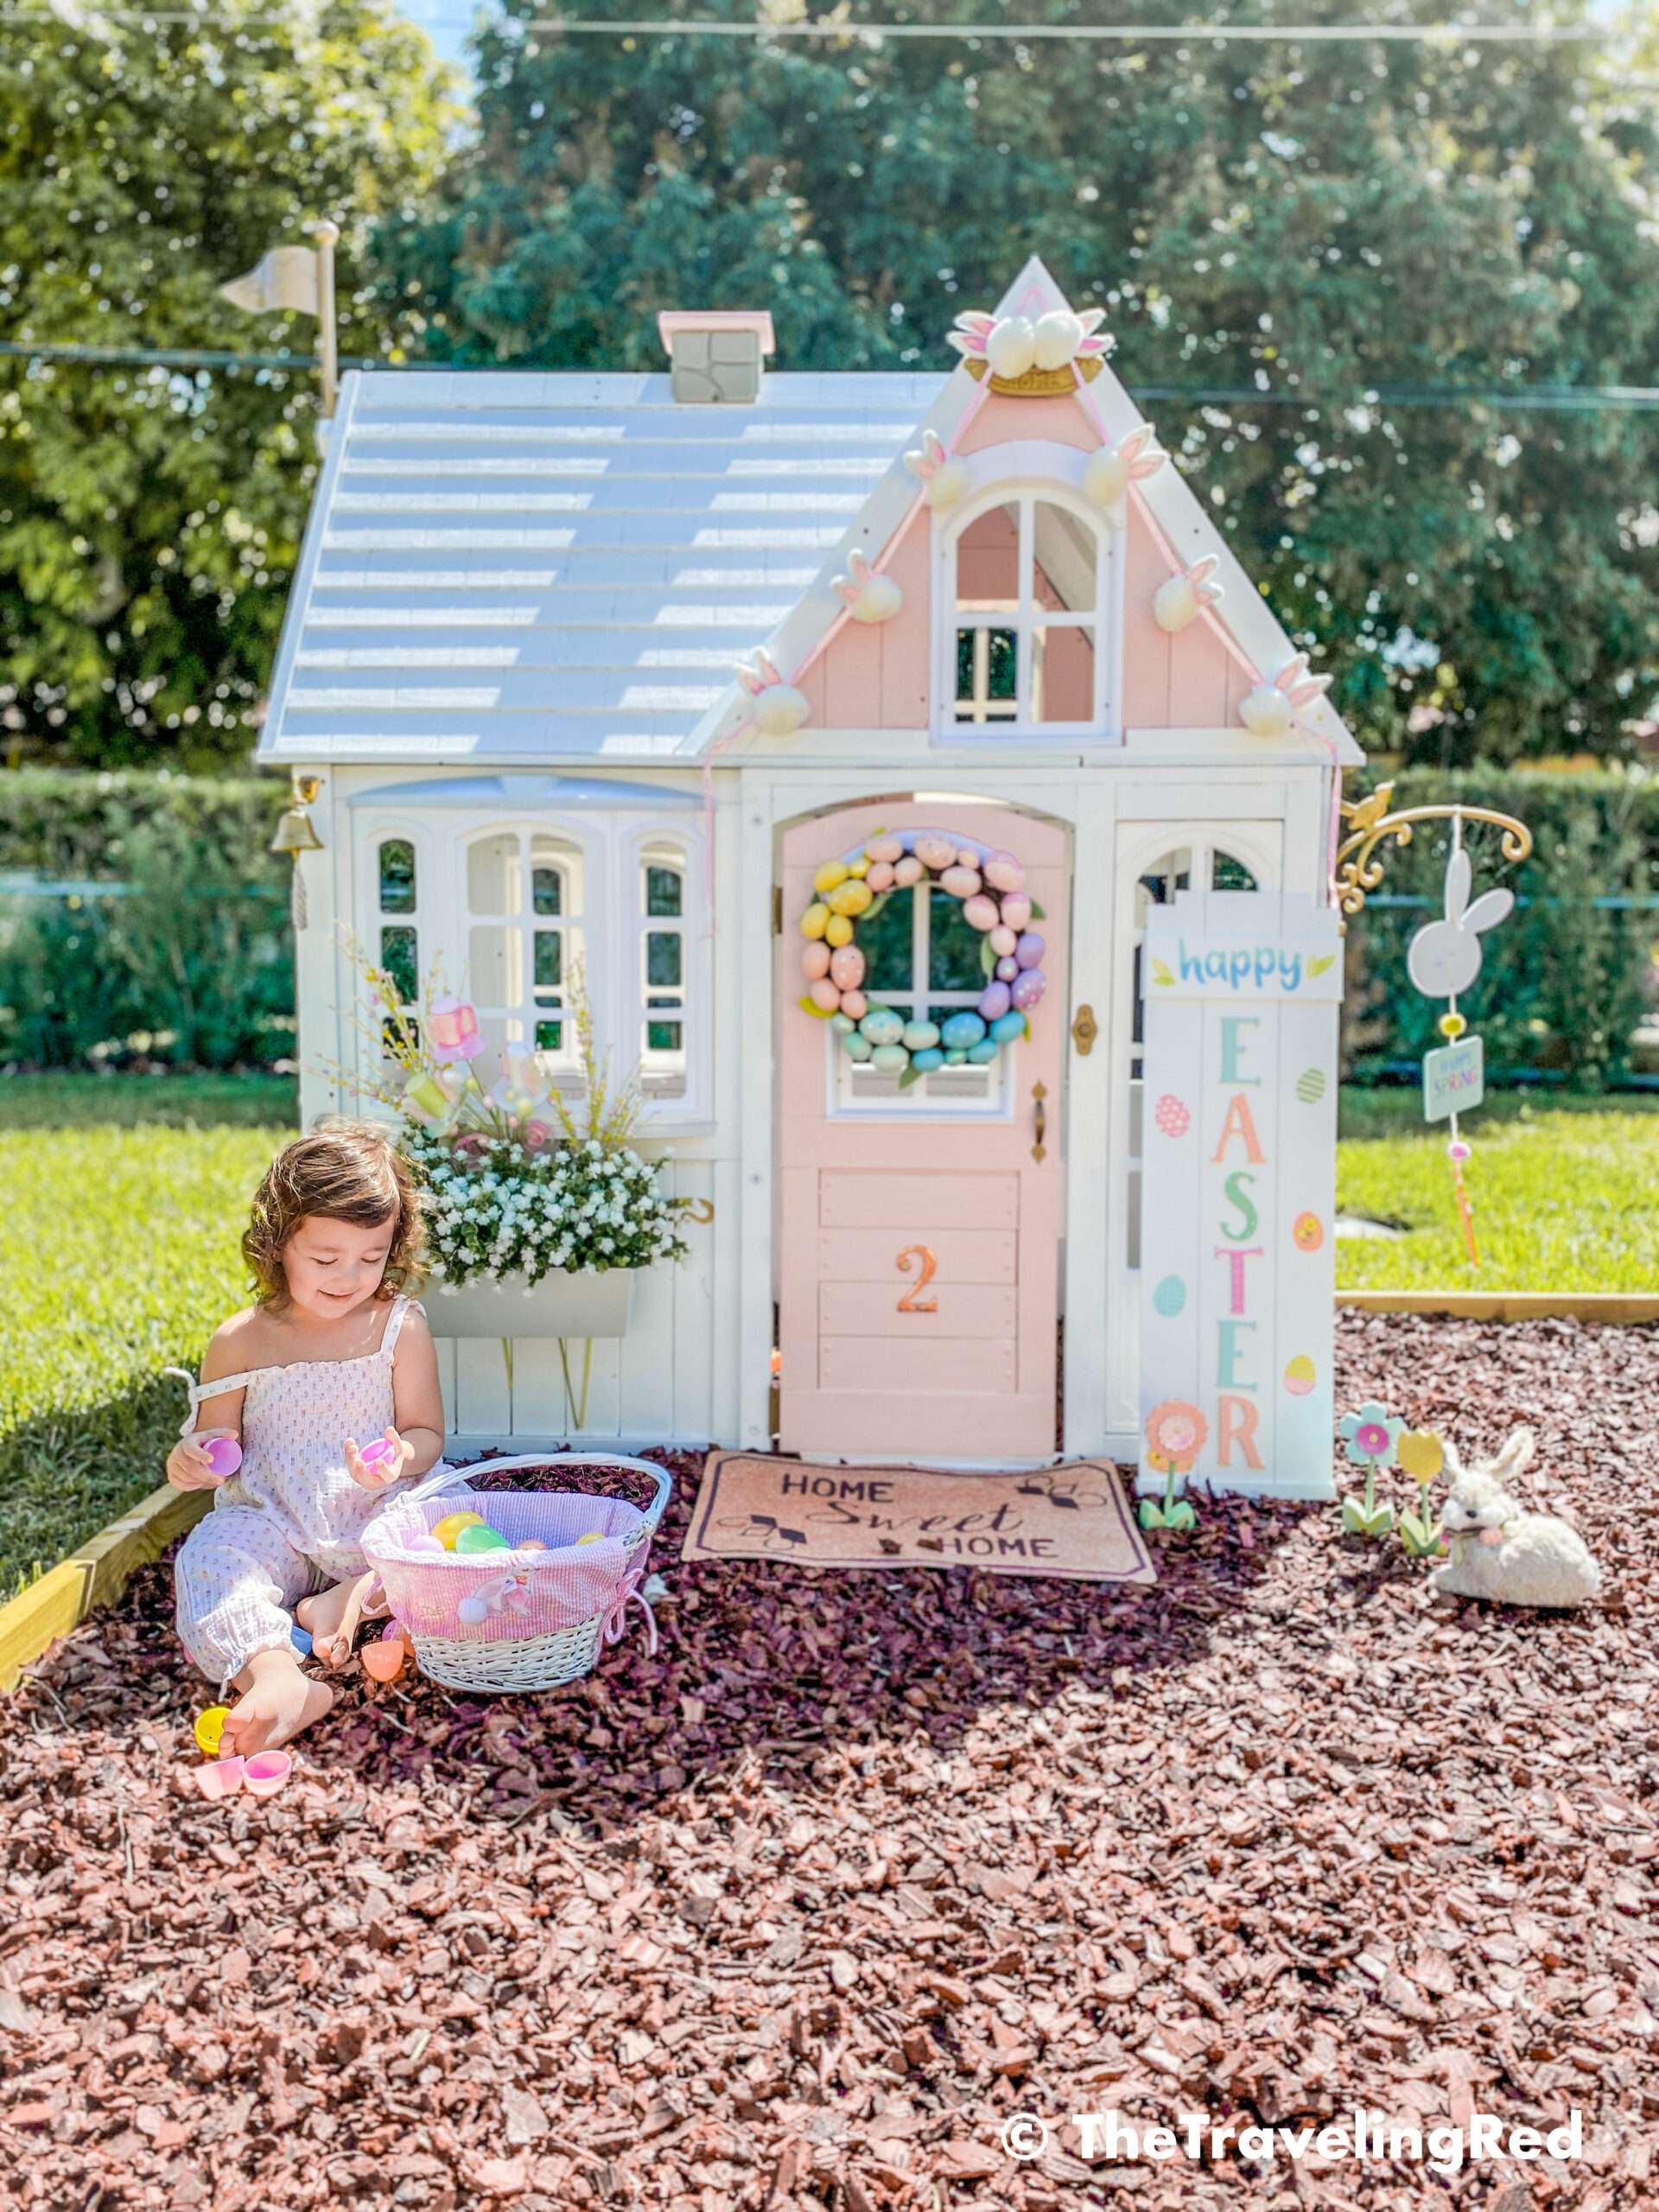 Little girls outdoor playhouse decorated for easter and spring. My daughters outdoor pink and white playhouse that my husband DIY ed for her custom backyard playground. It's the perfect backdrop for any photo shoot. I do seasonal photo shoots for each holiday in front of her house and decorate for the holiday. 